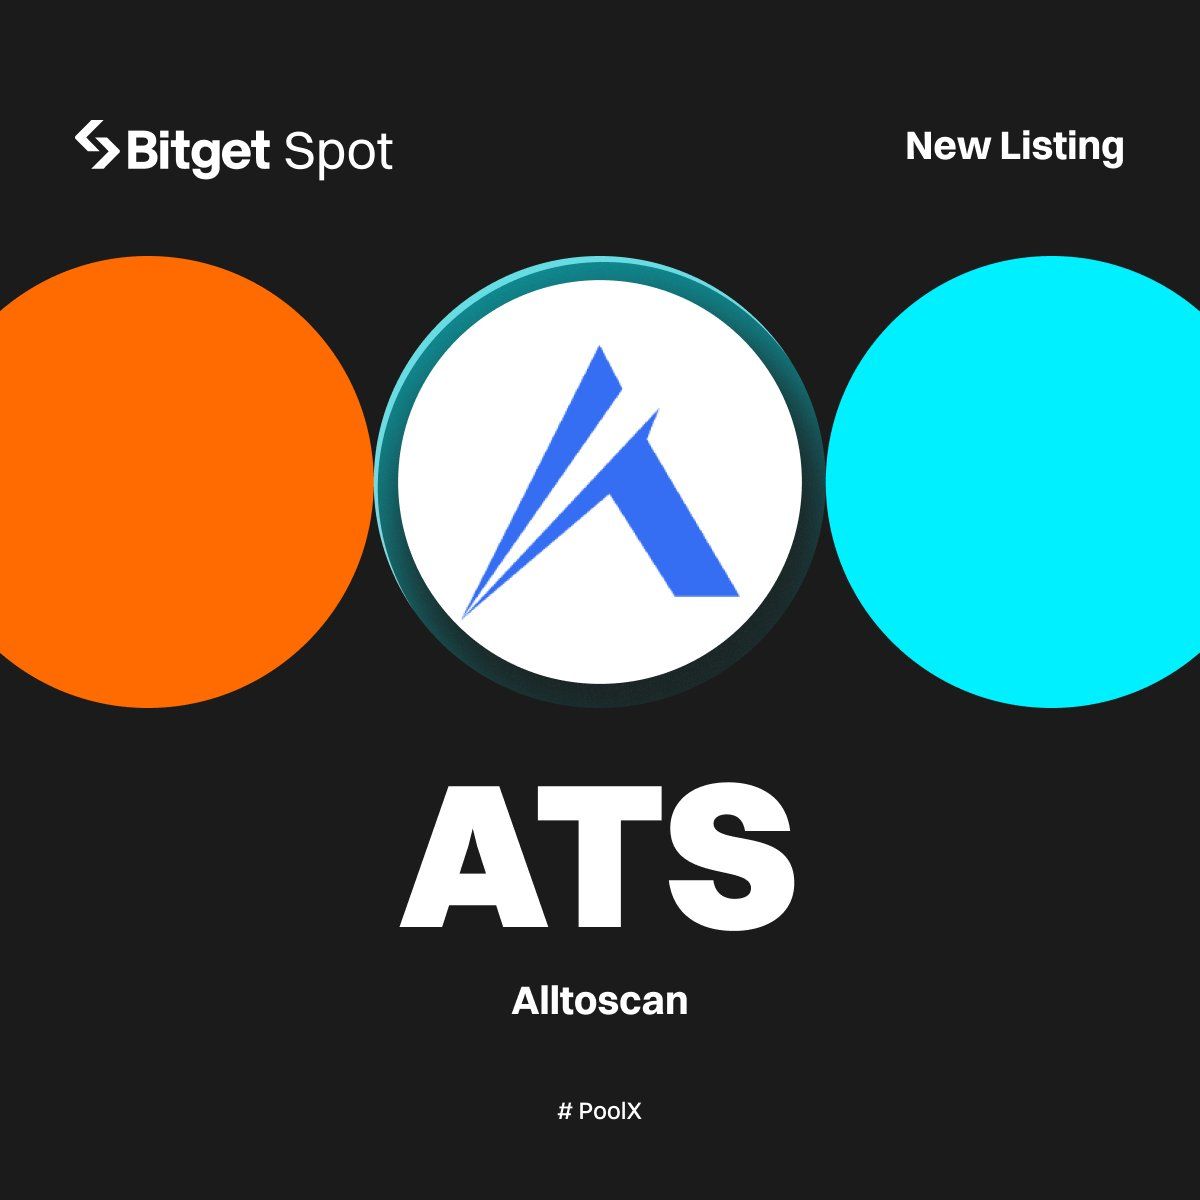 $ATS Token will become tradable on the Bitget exchange on May 13th! The project is currently available on mexc.com and gate.io, and has been performing great since its listing. I'm expecting a big rise with the listing on Bitget. You can get your